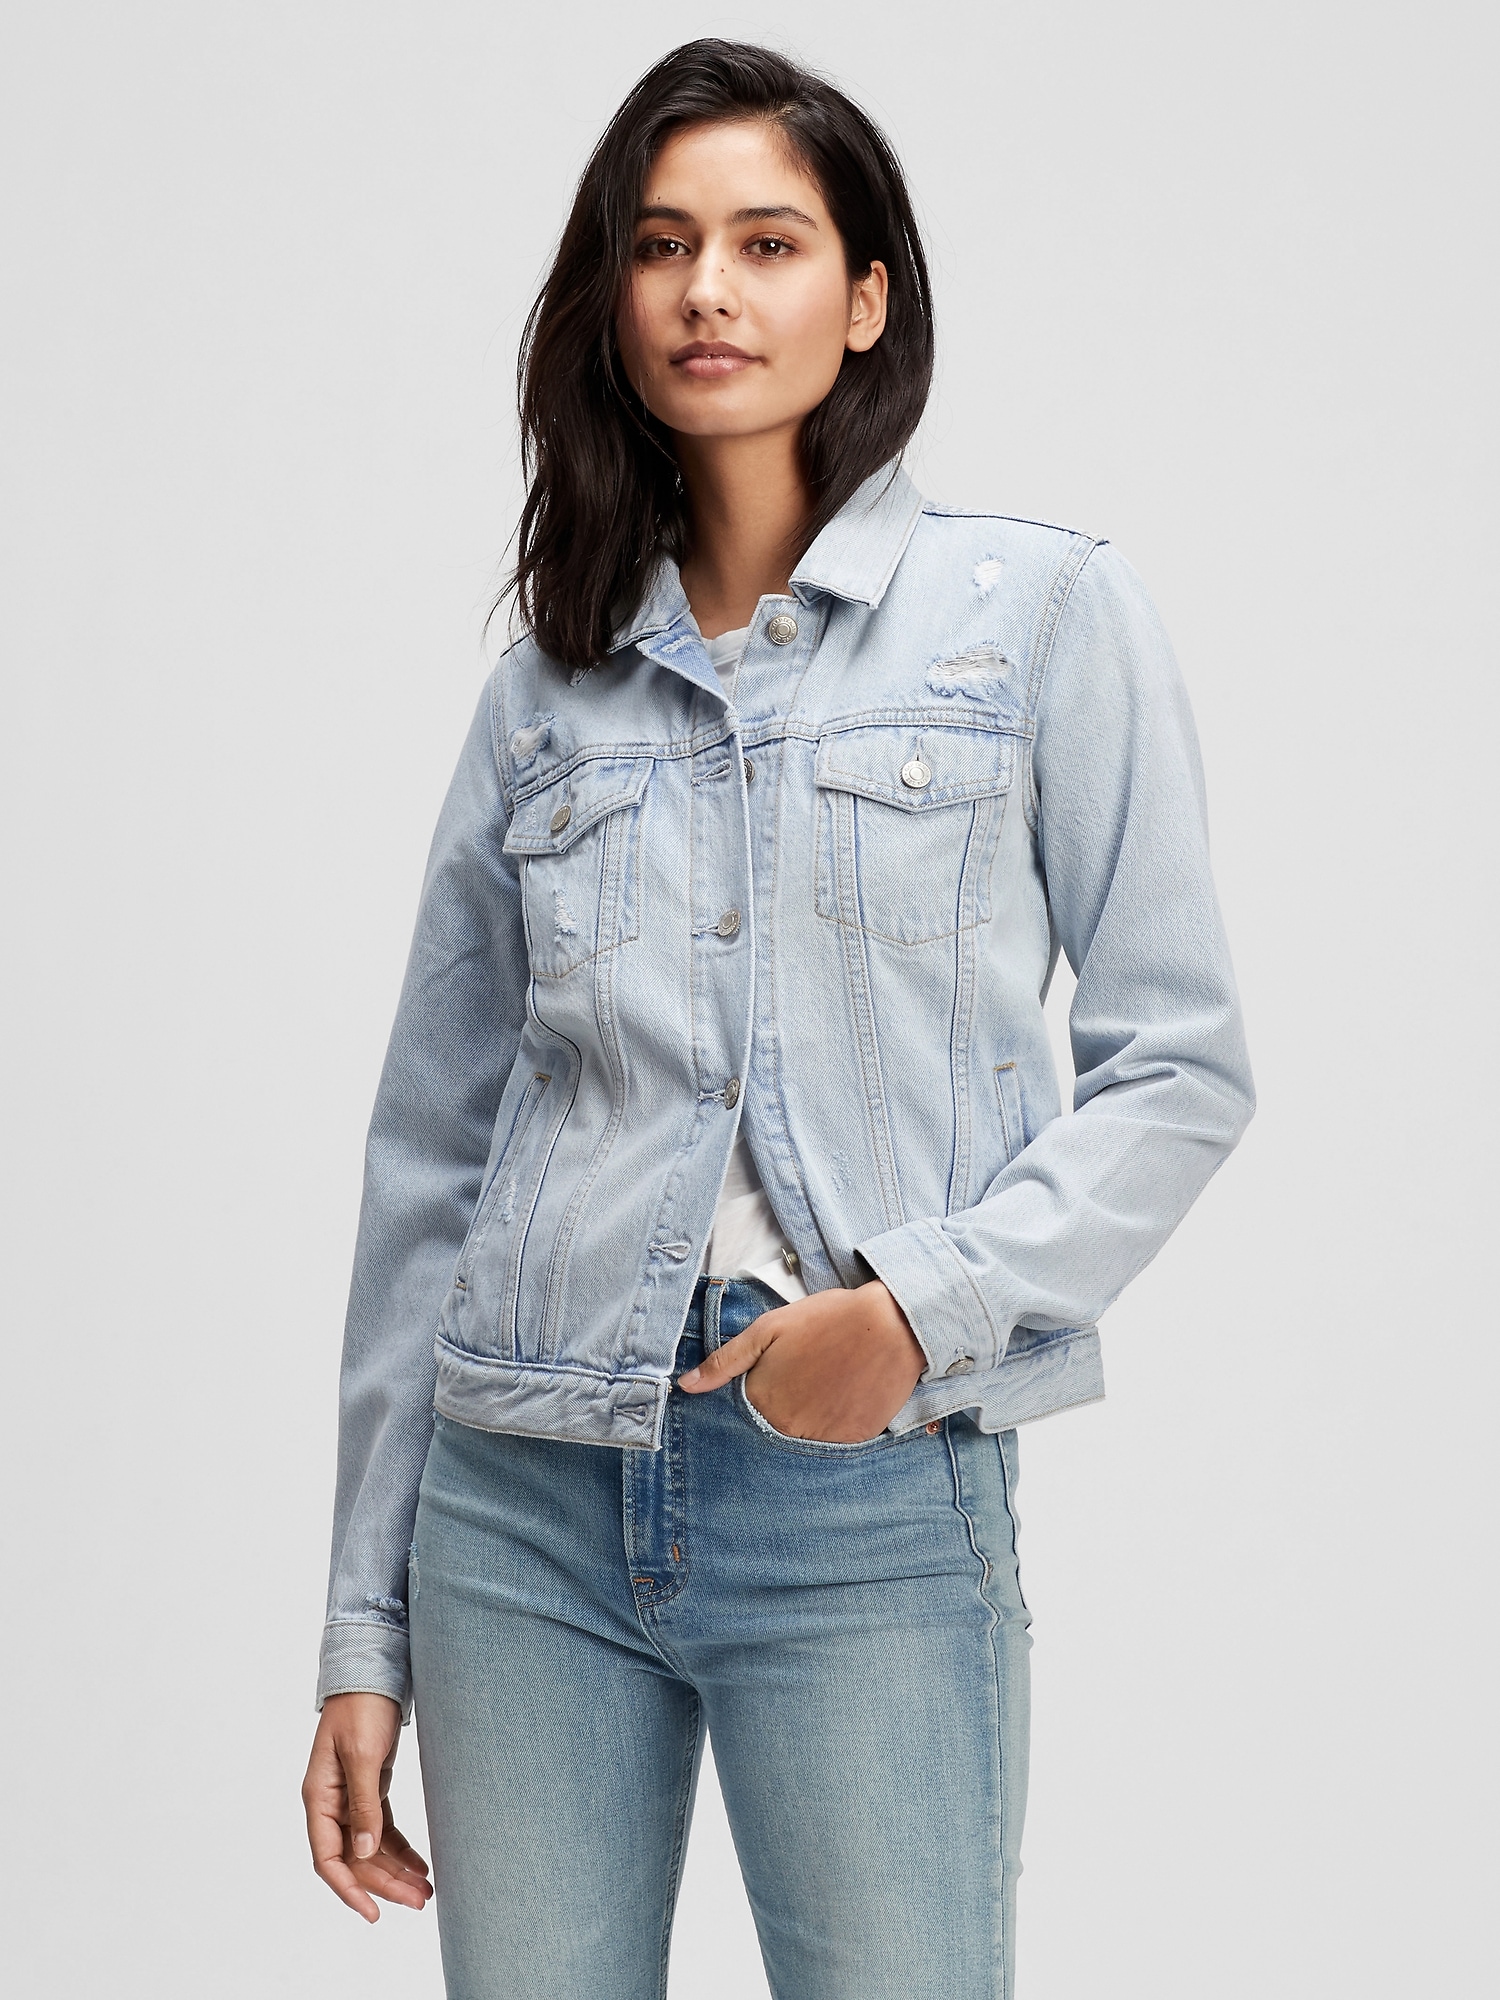 Distressed Icon Denim Jacket With Washwell | Gap Factory